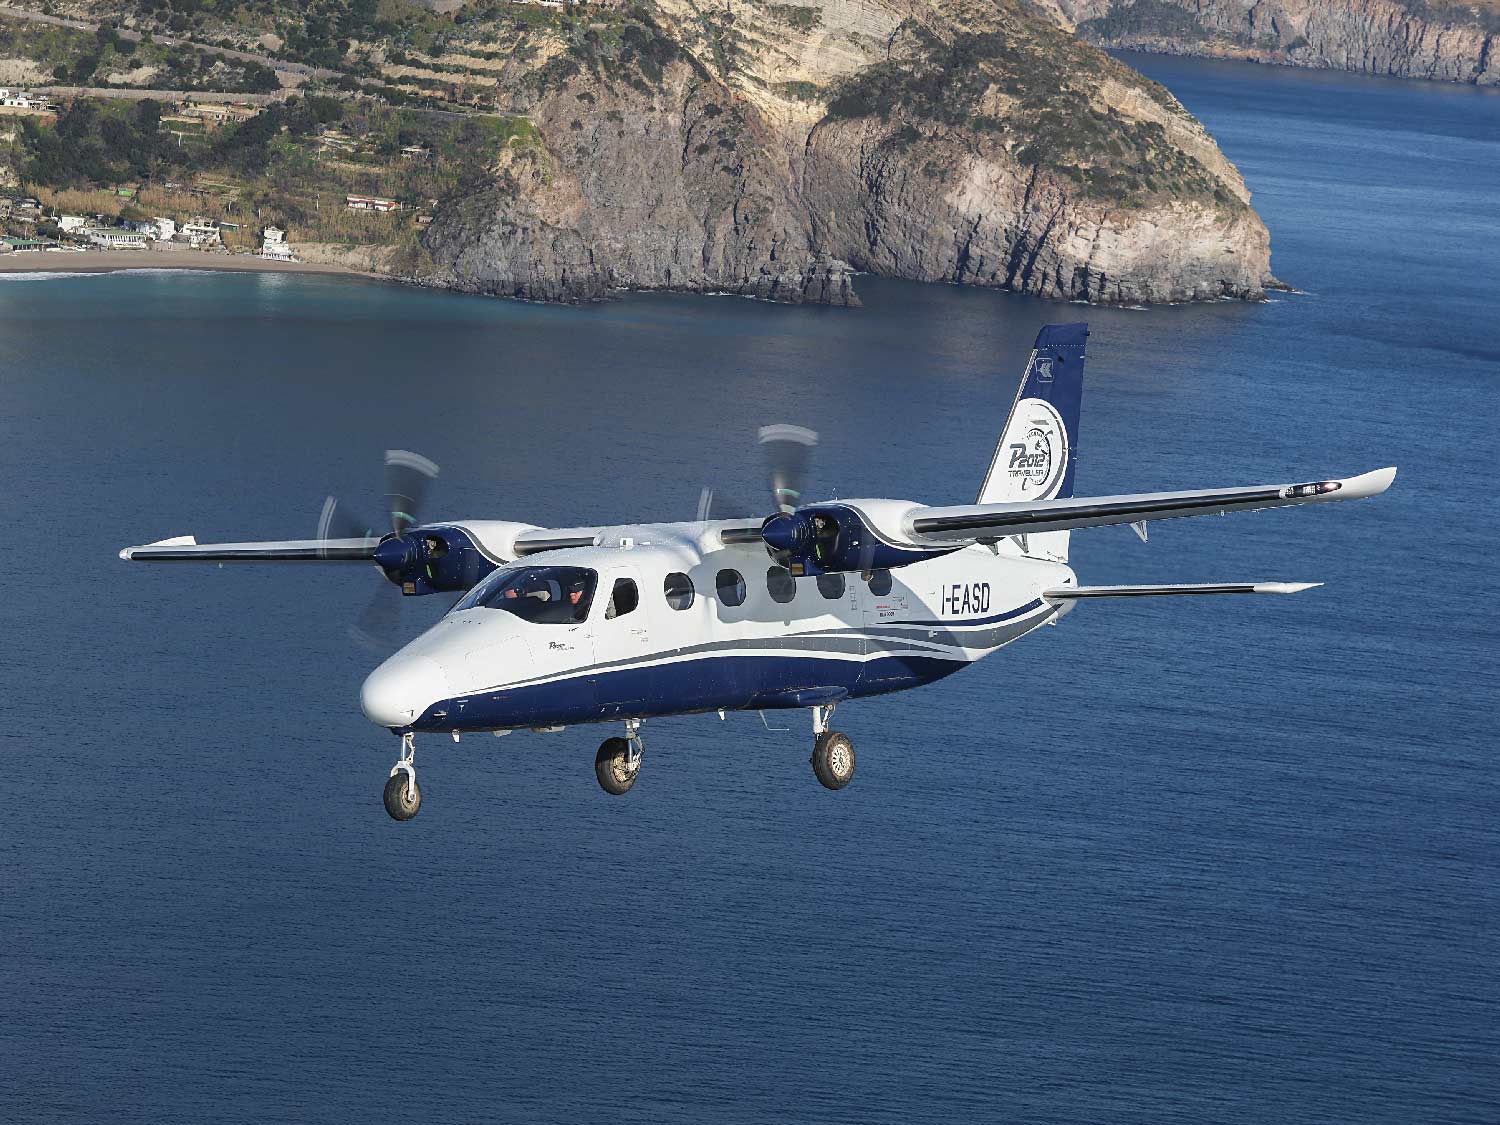 Tecnam&#8217;s P2012 Traveller May Be Unusual, But It Serves Its Purpose Well